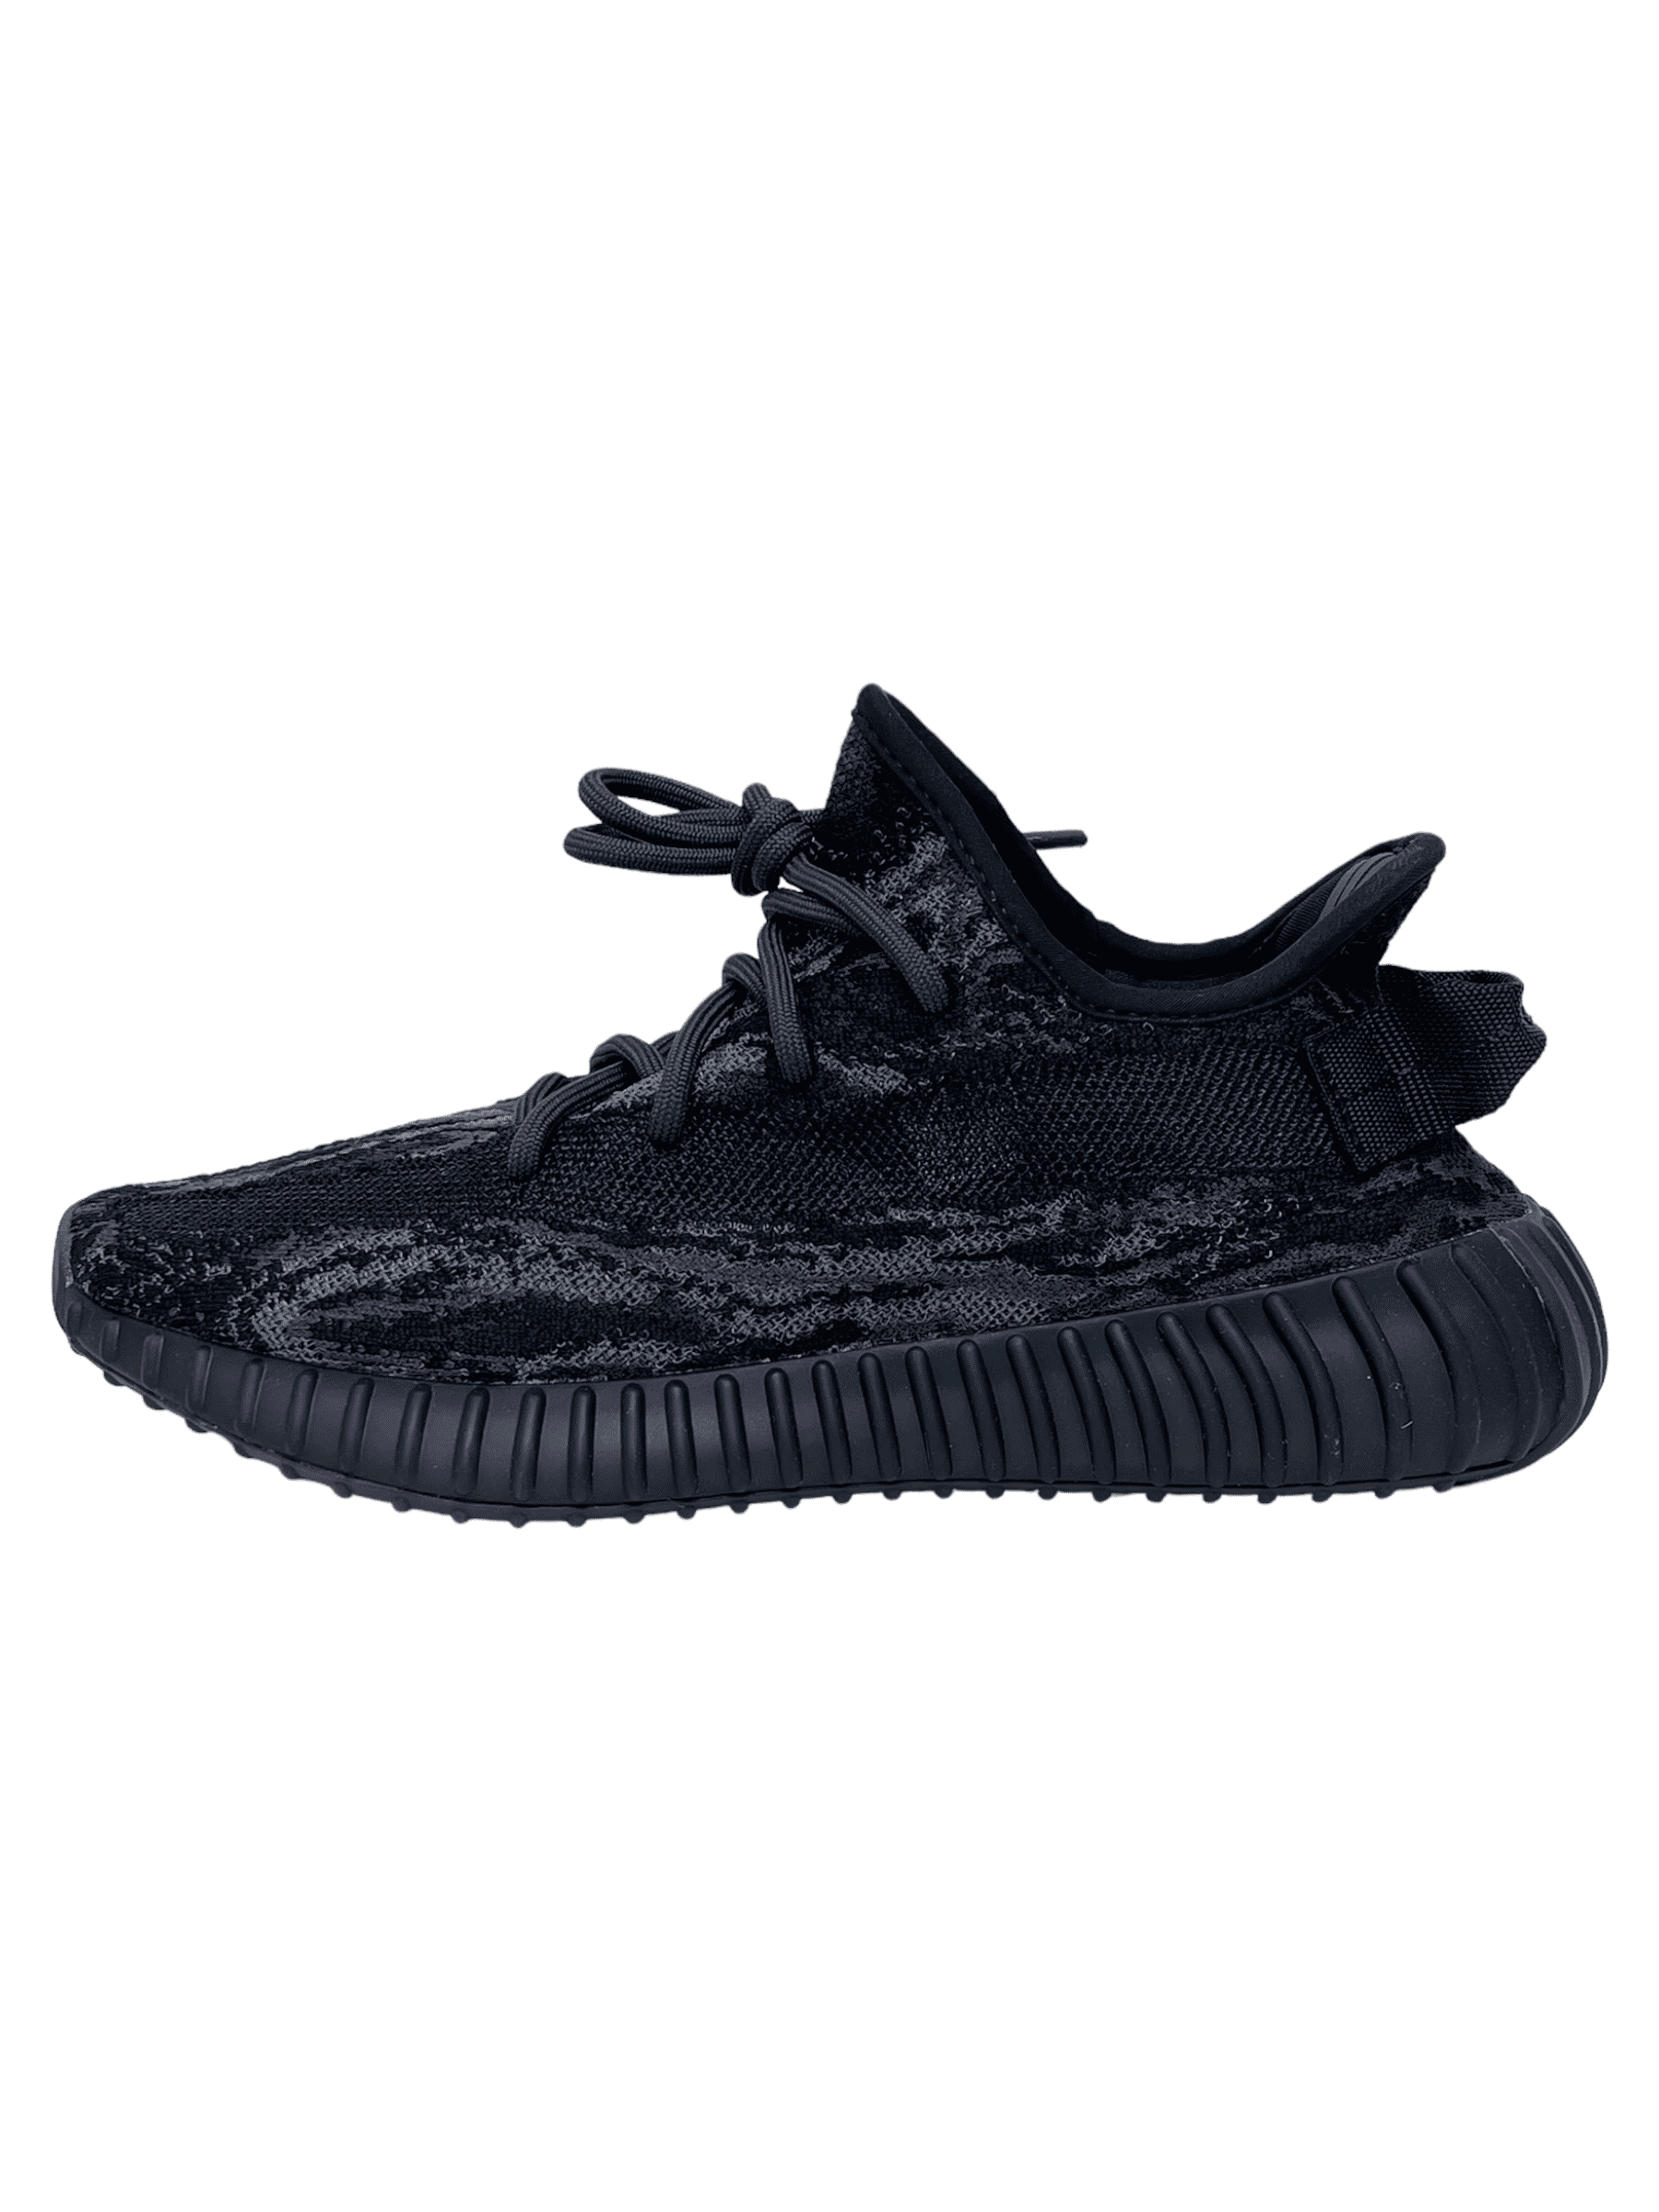 Adidas Yeezy 350 v2 MX Rock Sneakers - Genuine Design Luxury Consignment for Men. New & Pre-Owned Clothing, Shoes, & Accessories. Calgary, Canada